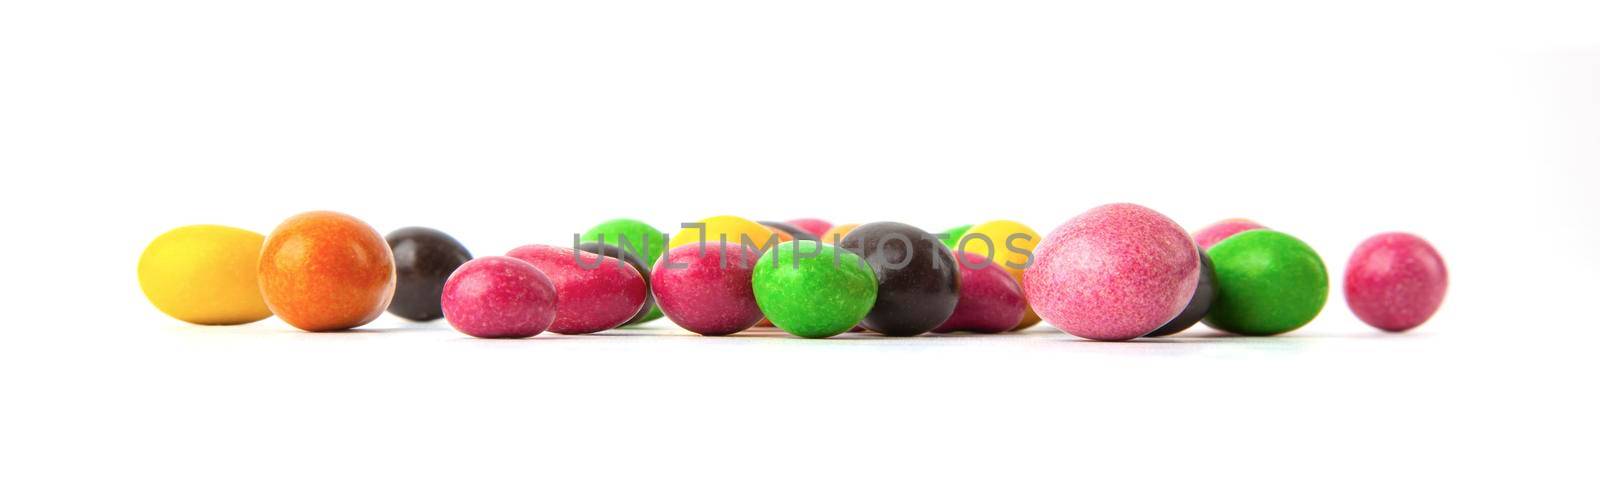 Colorful candies. Isolated on white background by SlayCer